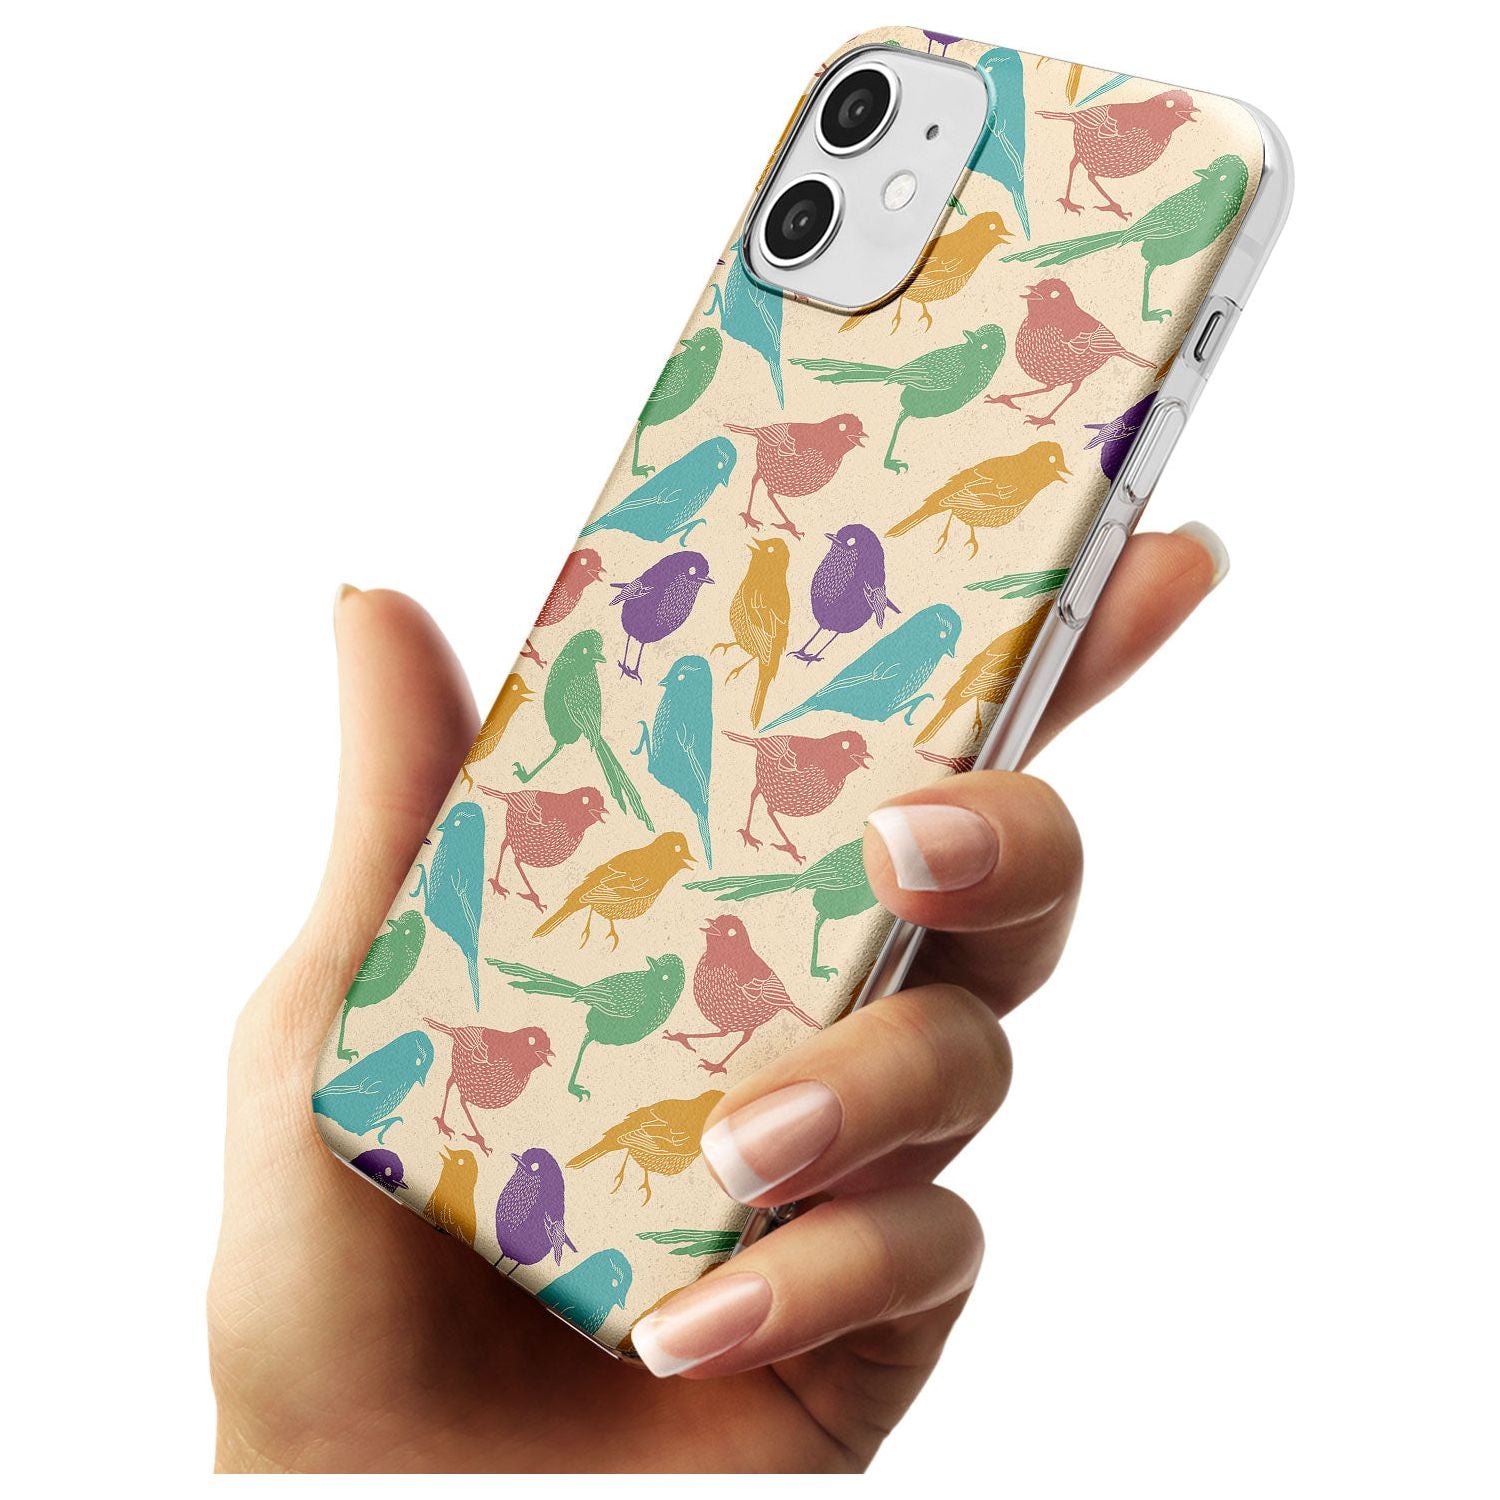 Colourful Feathered Friends Bird Slim TPU Phone Case for iPhone 11